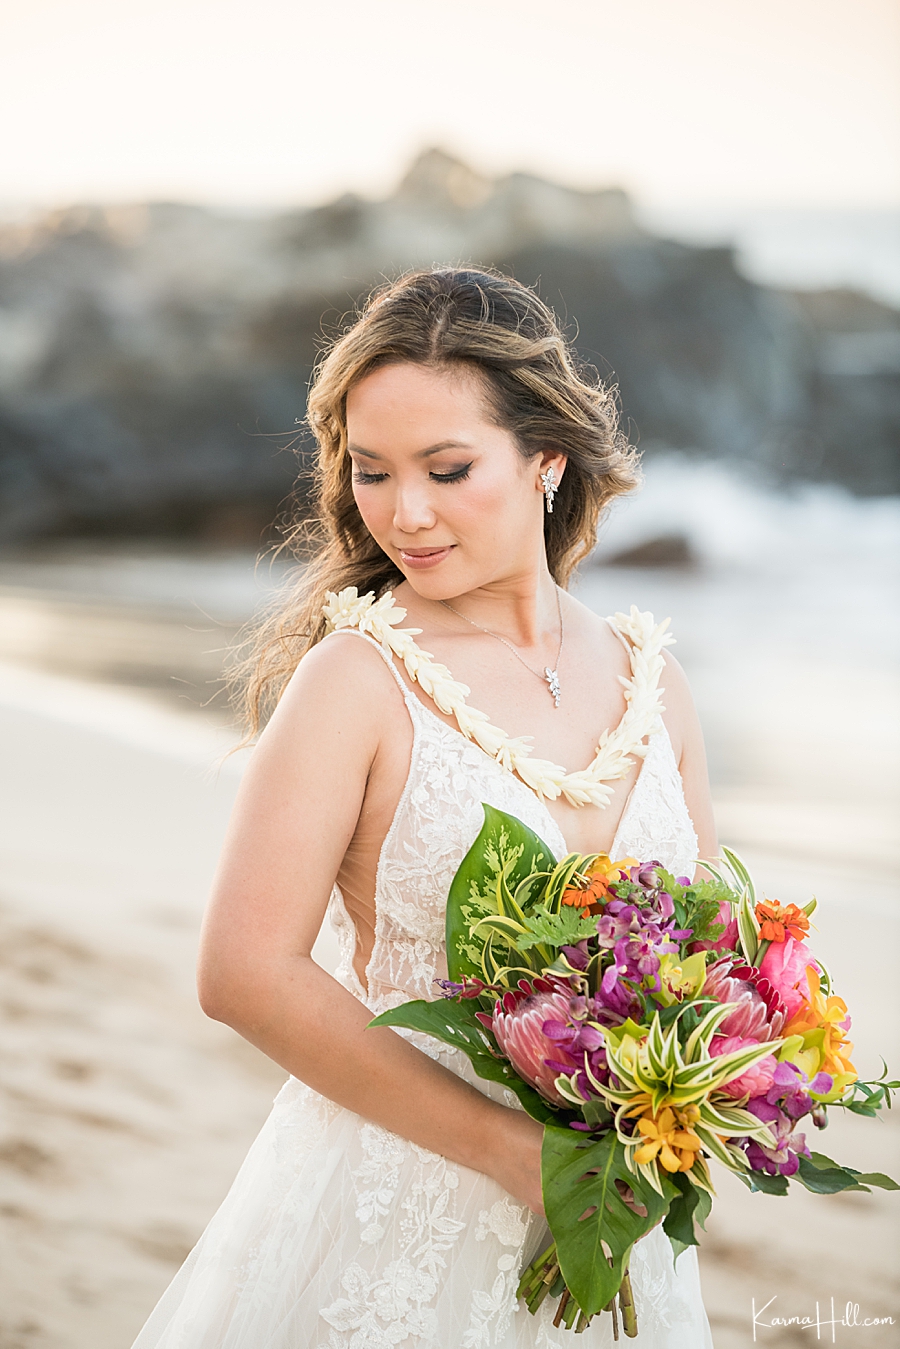 Just the Two of Us - Jasmin & Fred's Elopement in Maui